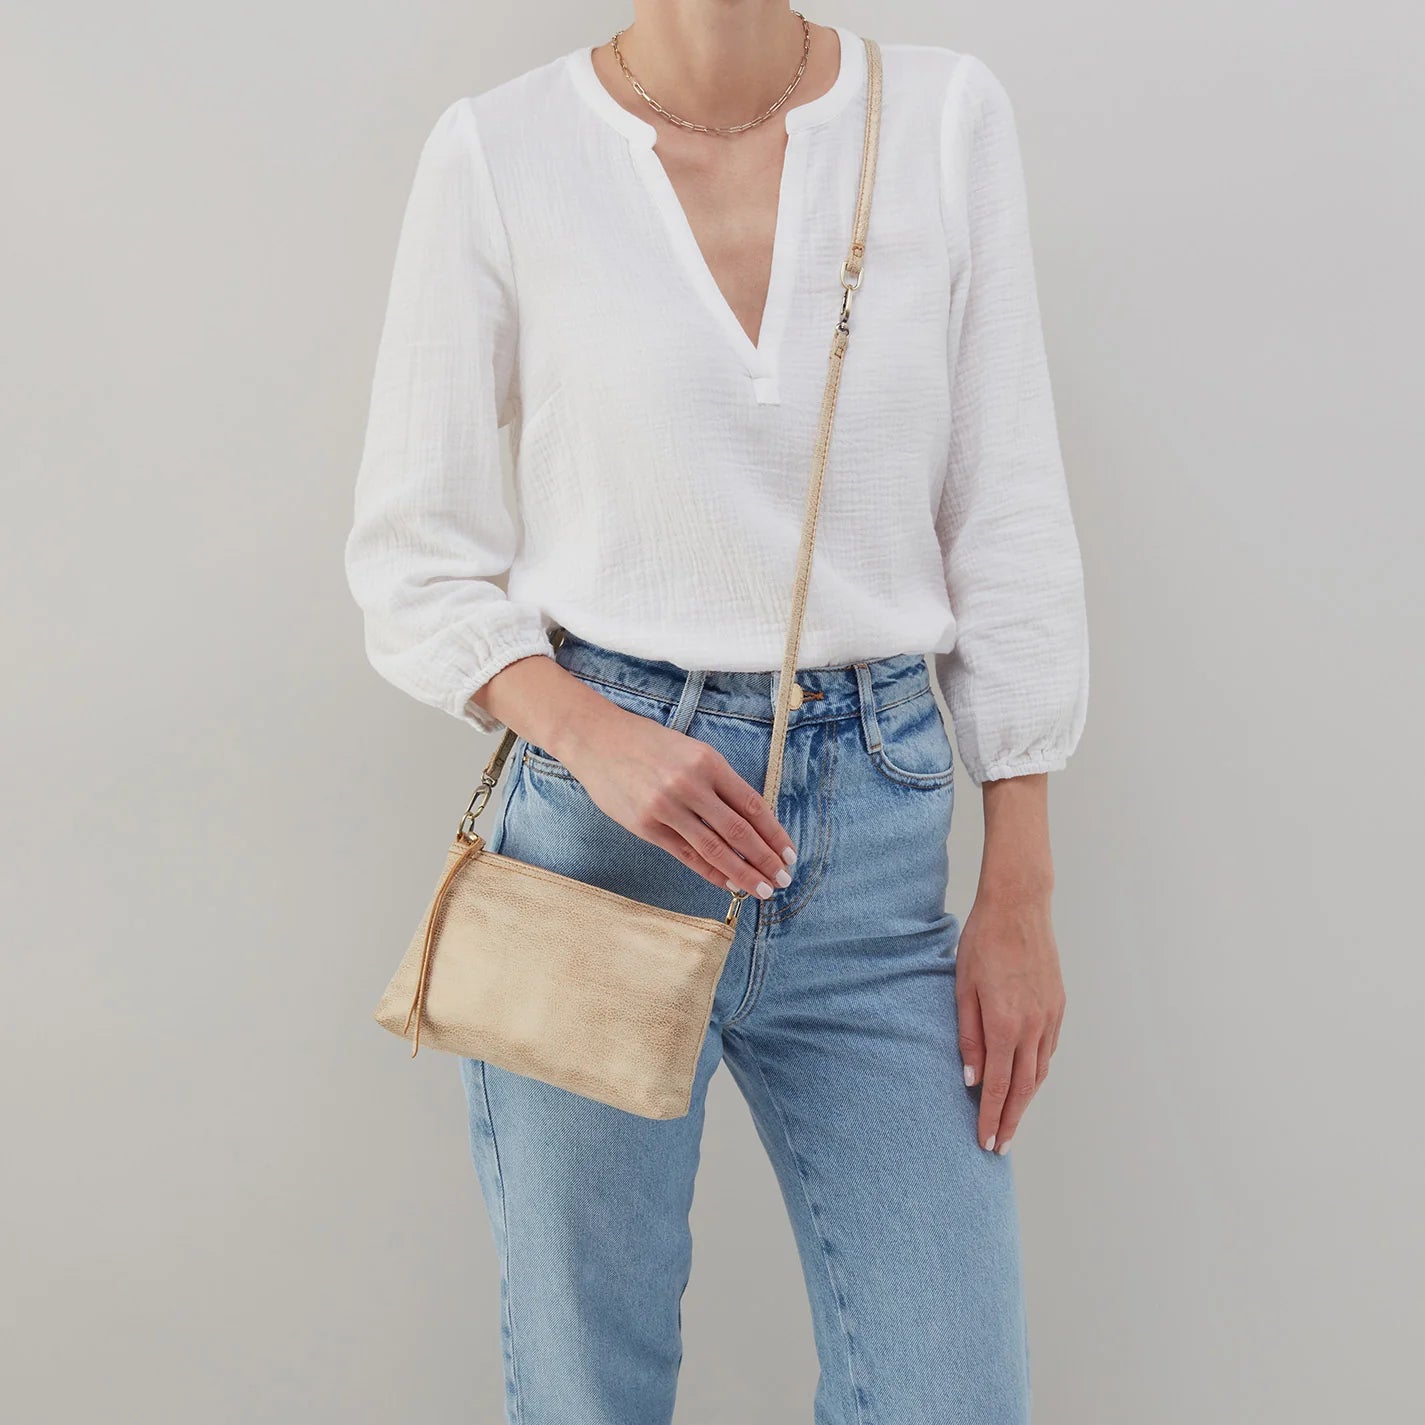 This iconic and convertible Darcy Crossbody Gold Leaf by HOBO can be worn three ways: crossbody, baguette bag and wristlet. Available at the Painted Cottage in Edgewater, MD